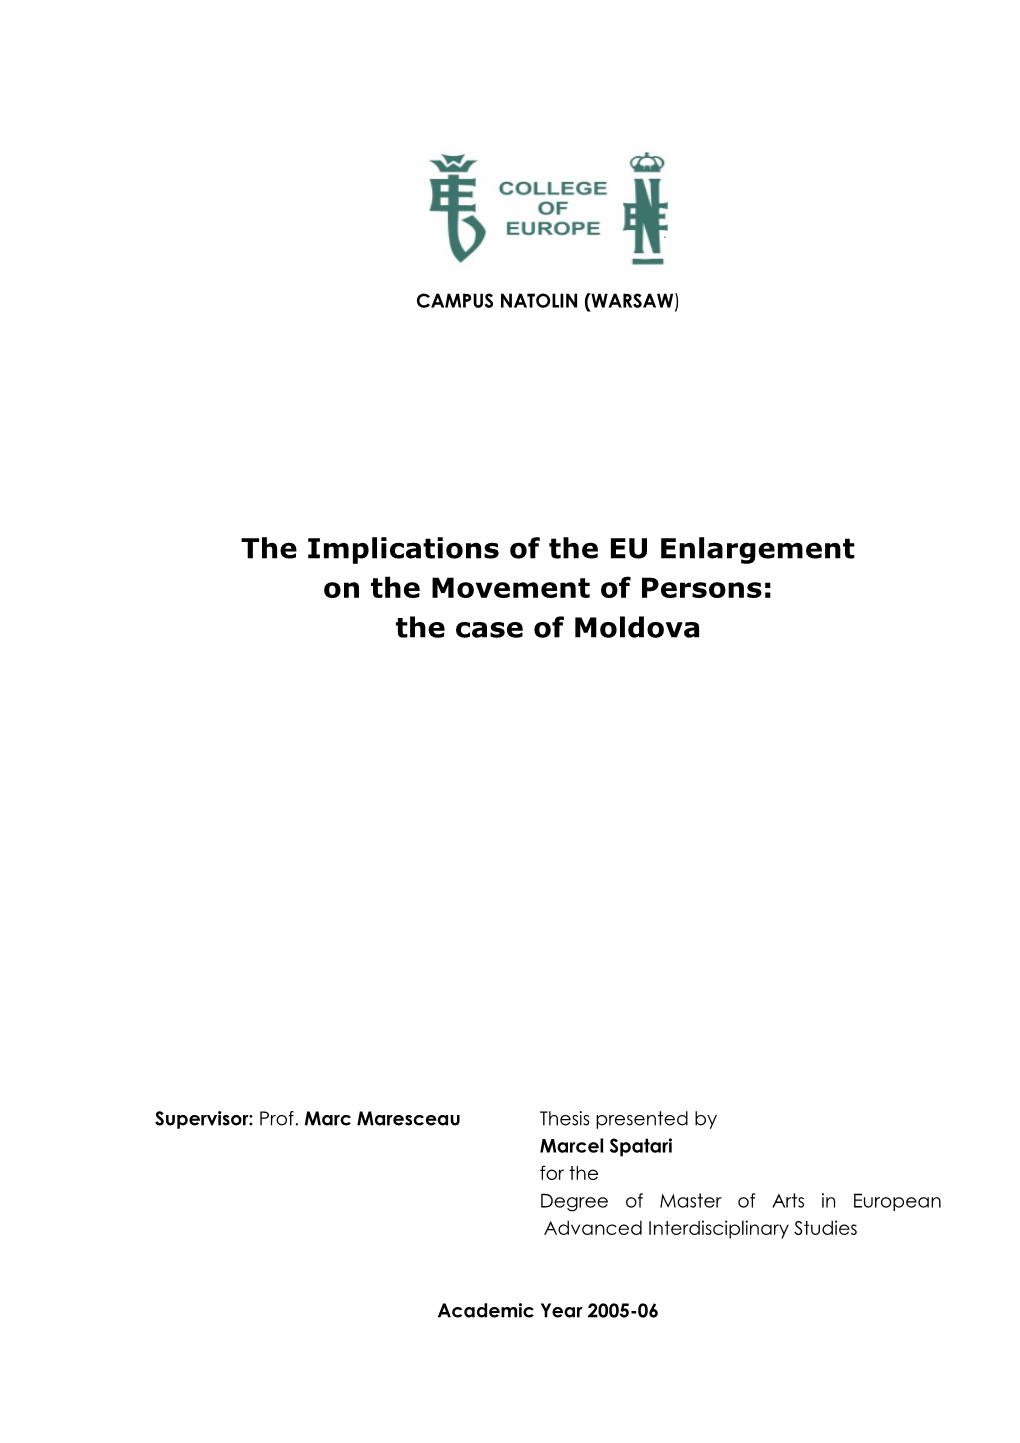 The Implications of the EU Enlargement on the Movement of Persons: the Case of Moldova